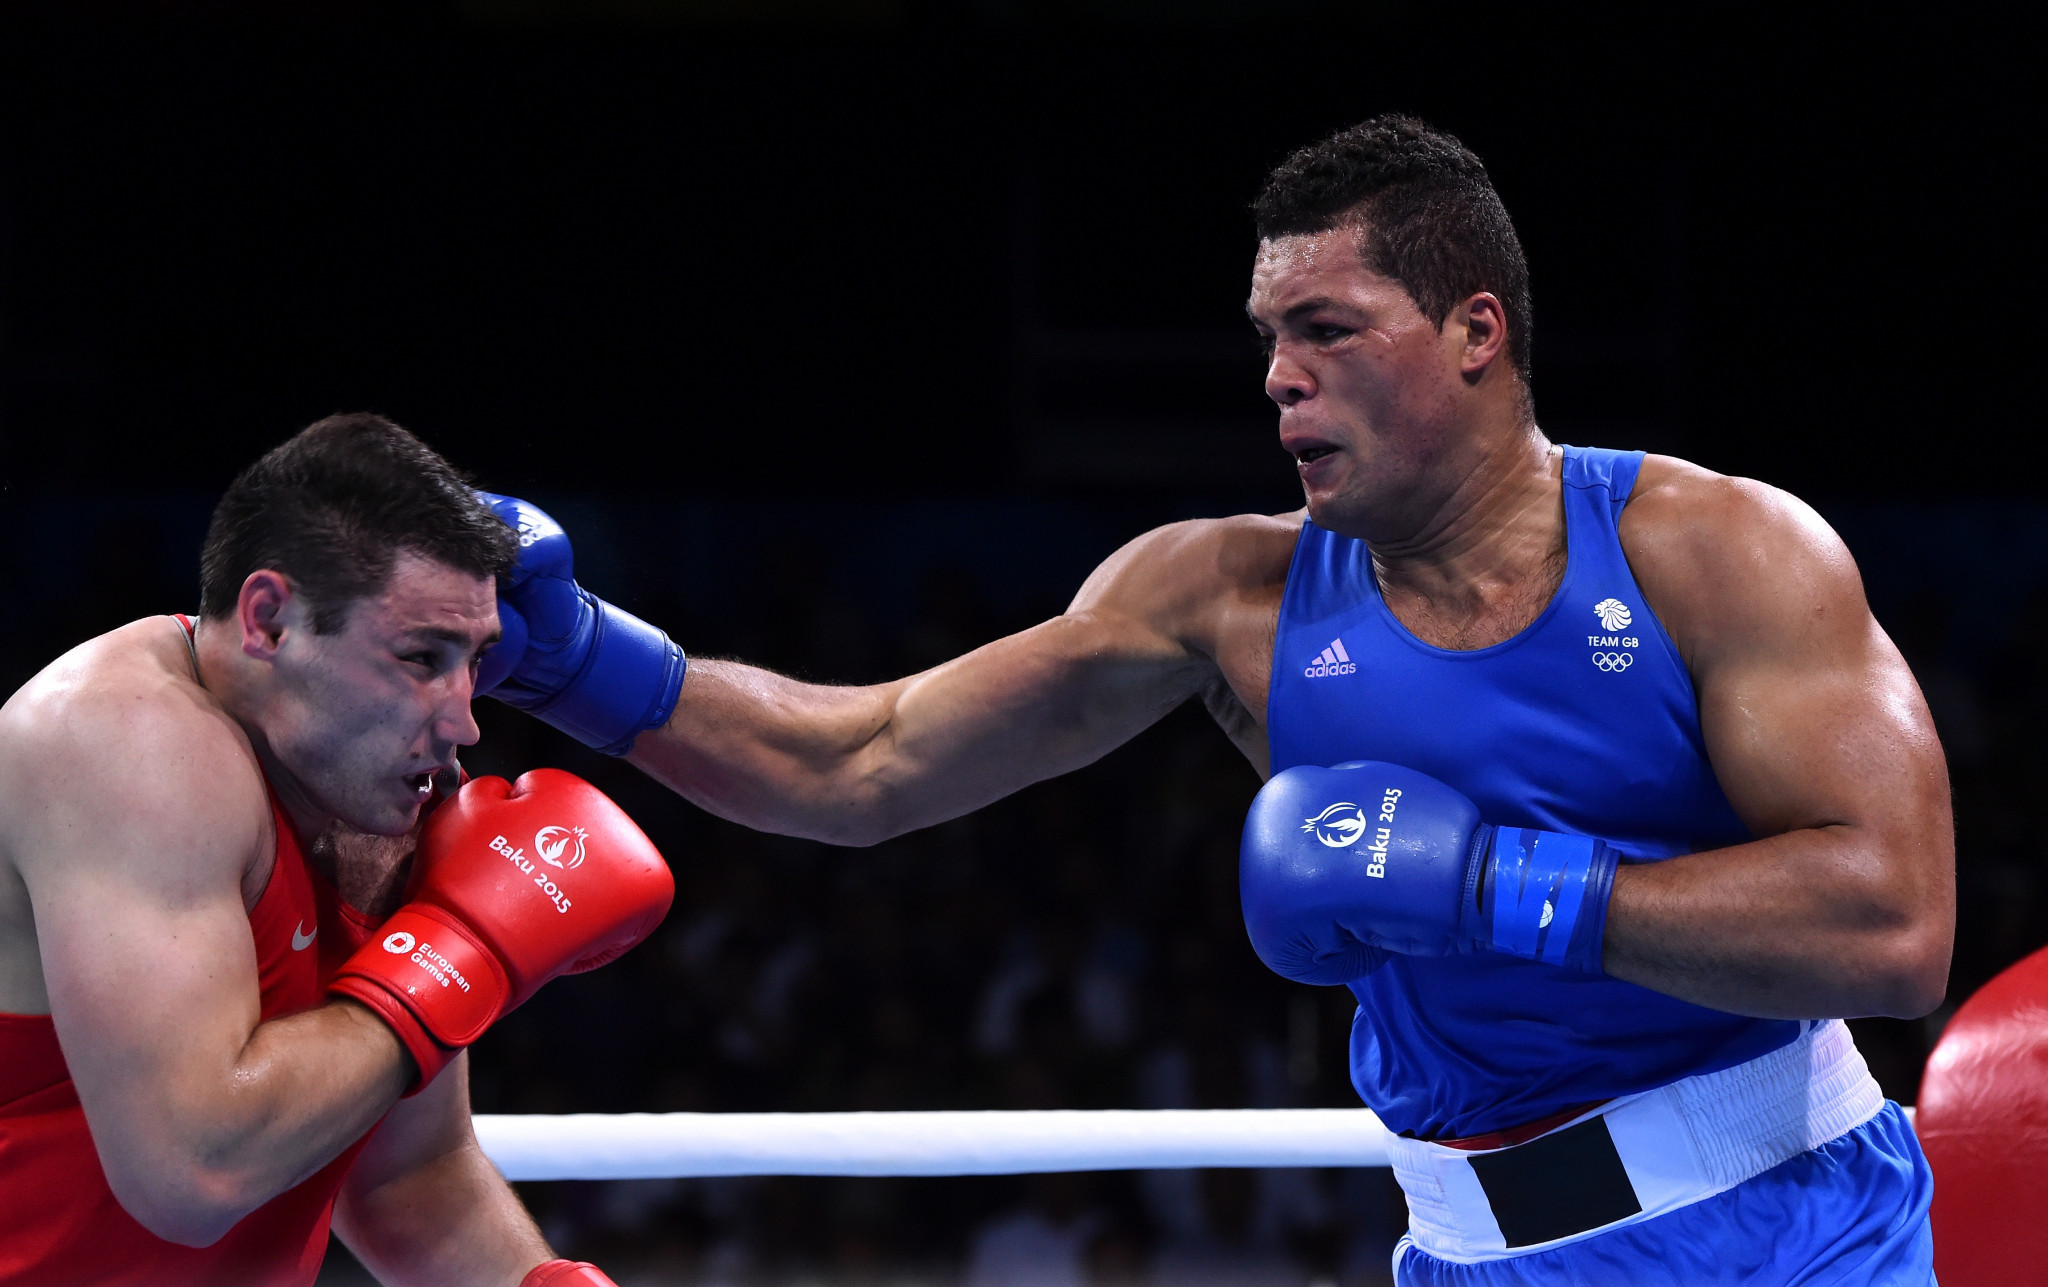 Scores will be displayed at the end of each round during the boxing tournament at Tokyo 2020, it has been announced by the IOC Boxing Task Force ©Getty Images